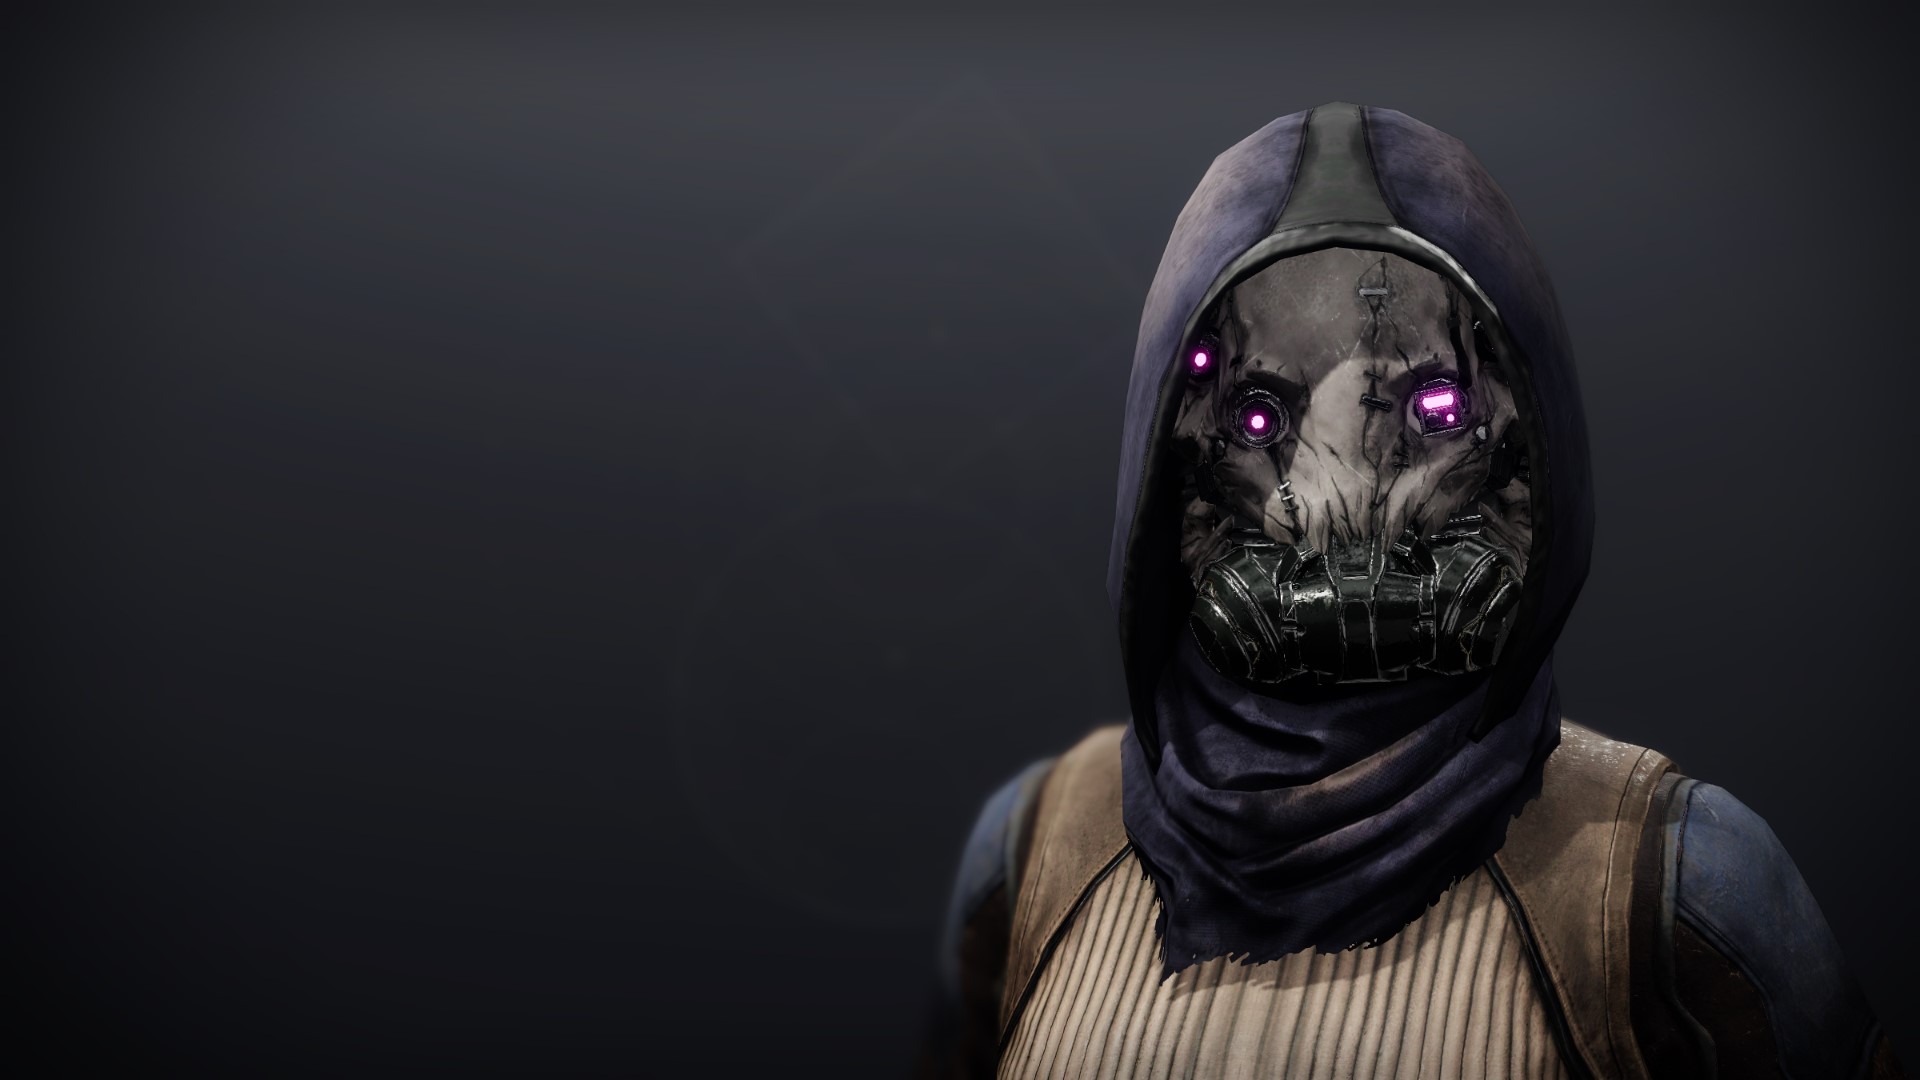 An in-game render of the Mask of Bakris.